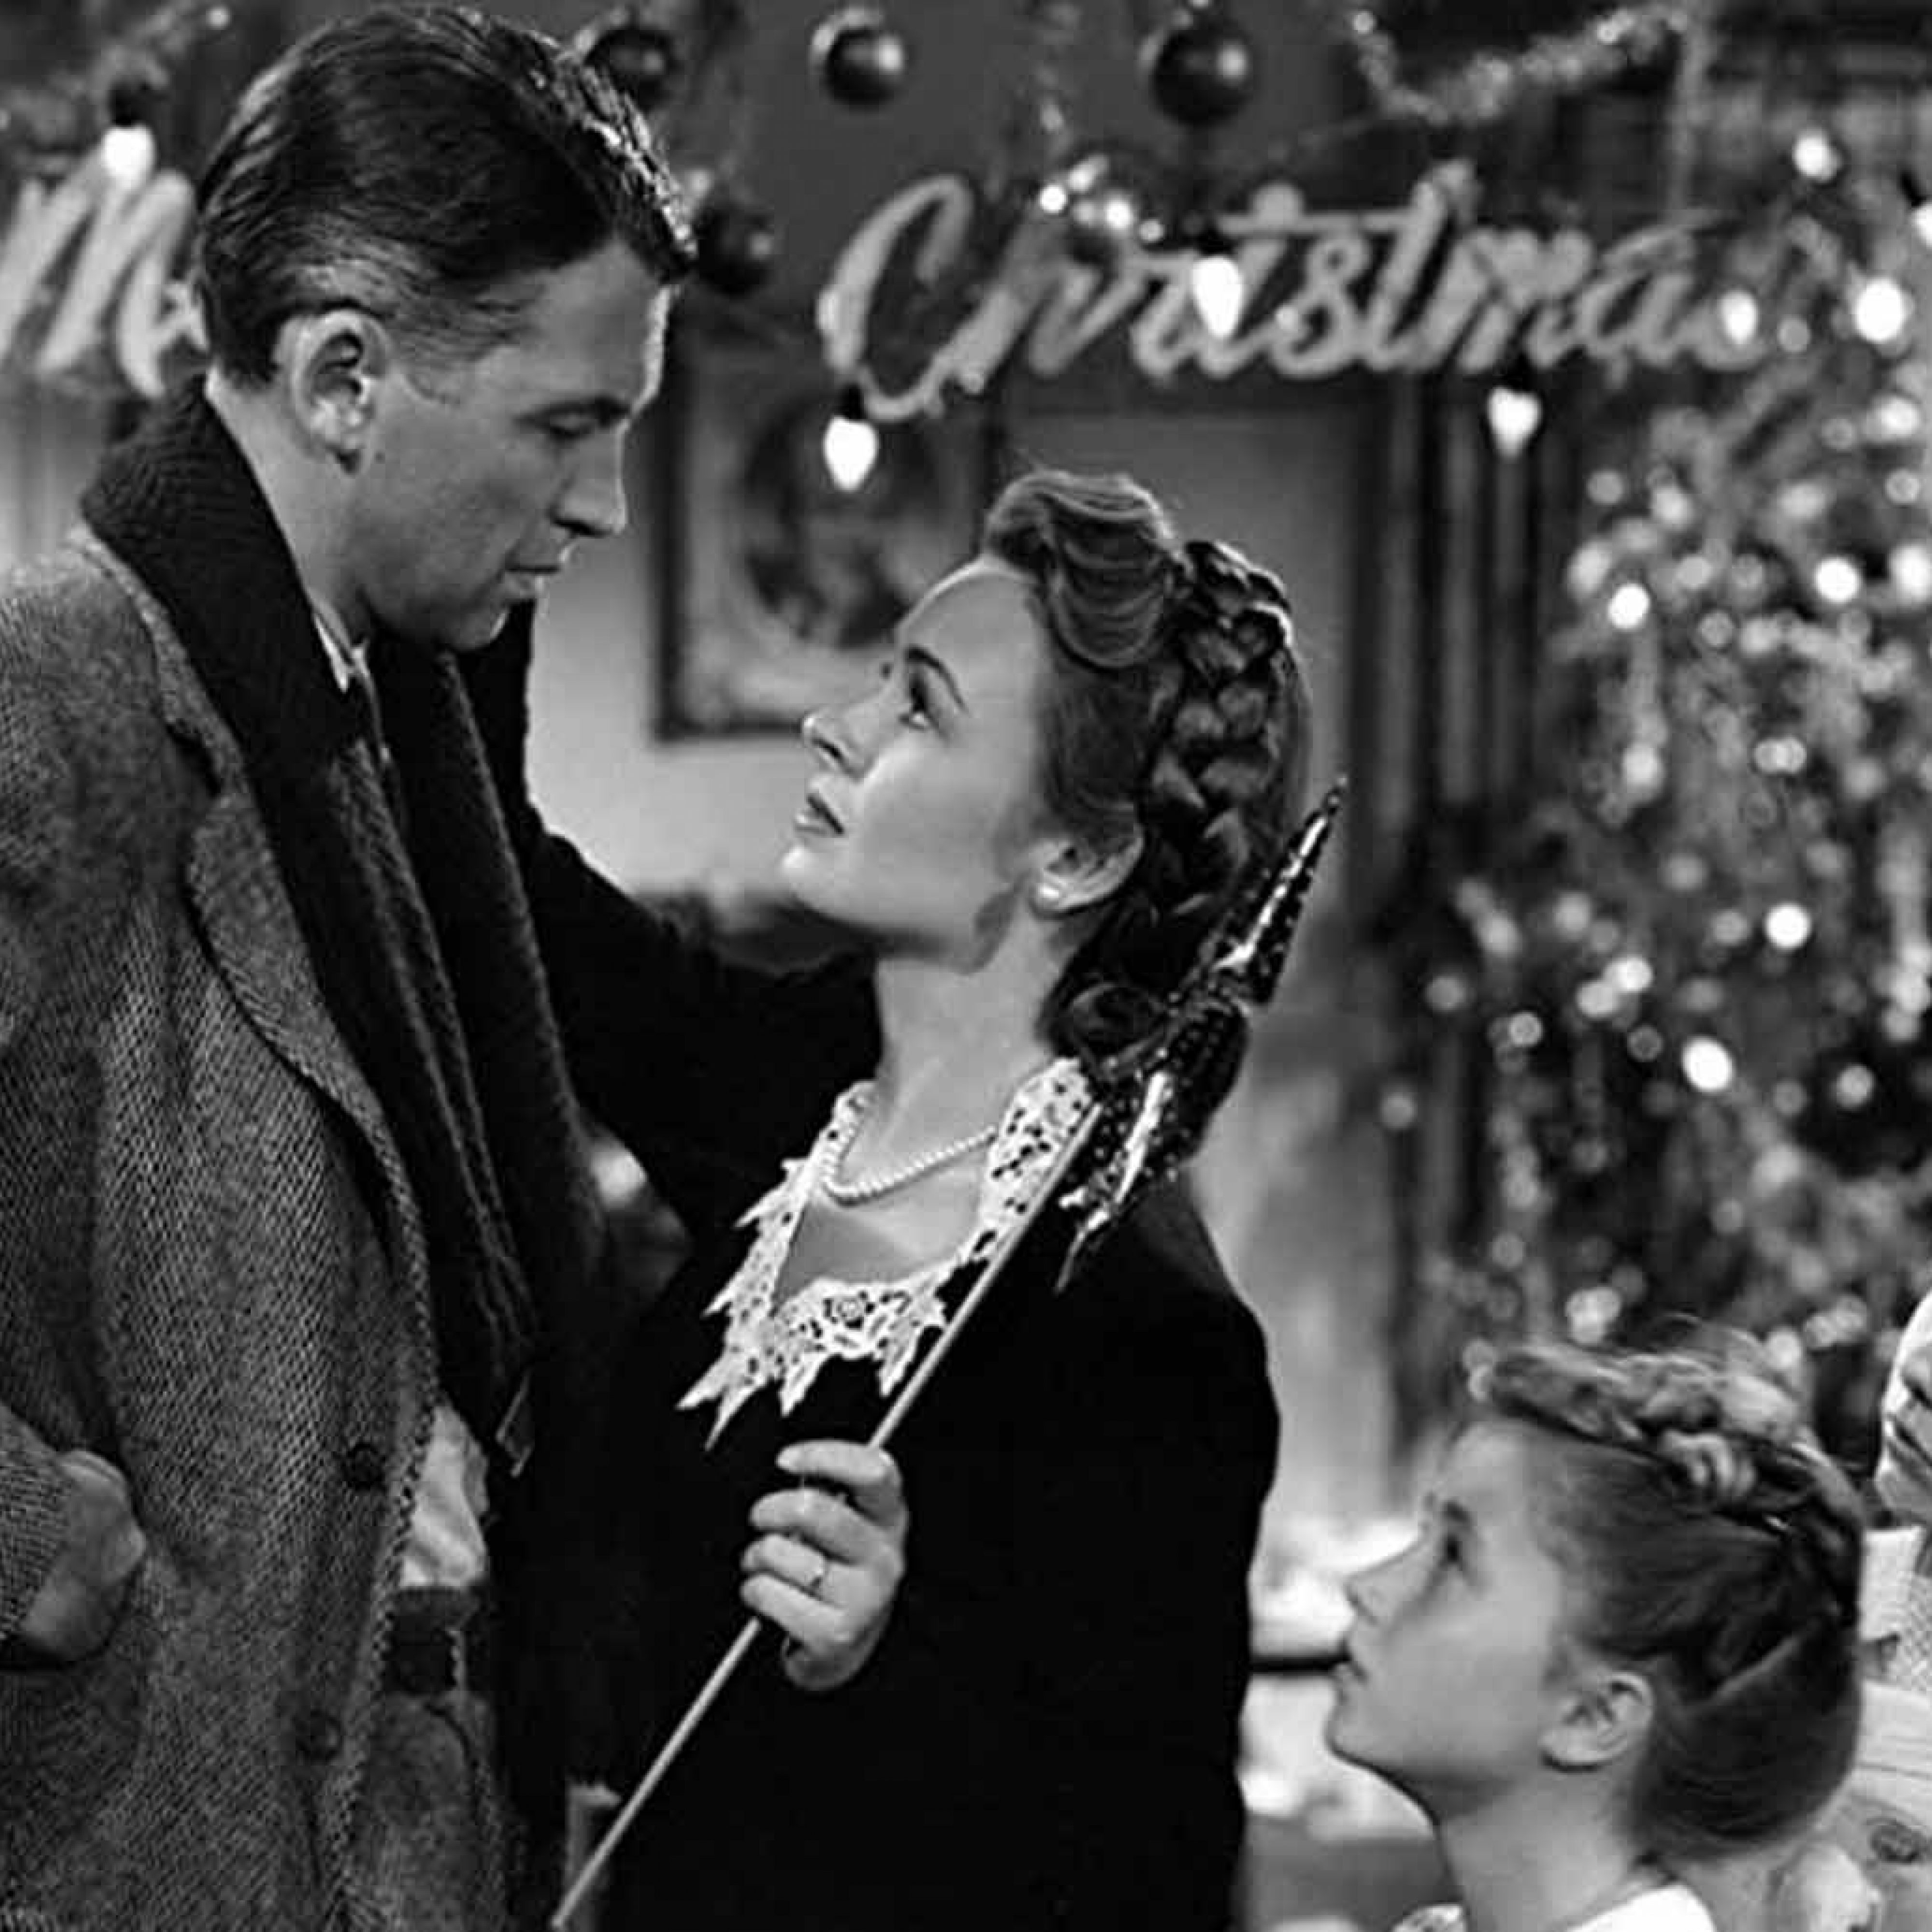 10-Life-Lessons-From-Christmas-Classics-That-Will-Make-You-Think